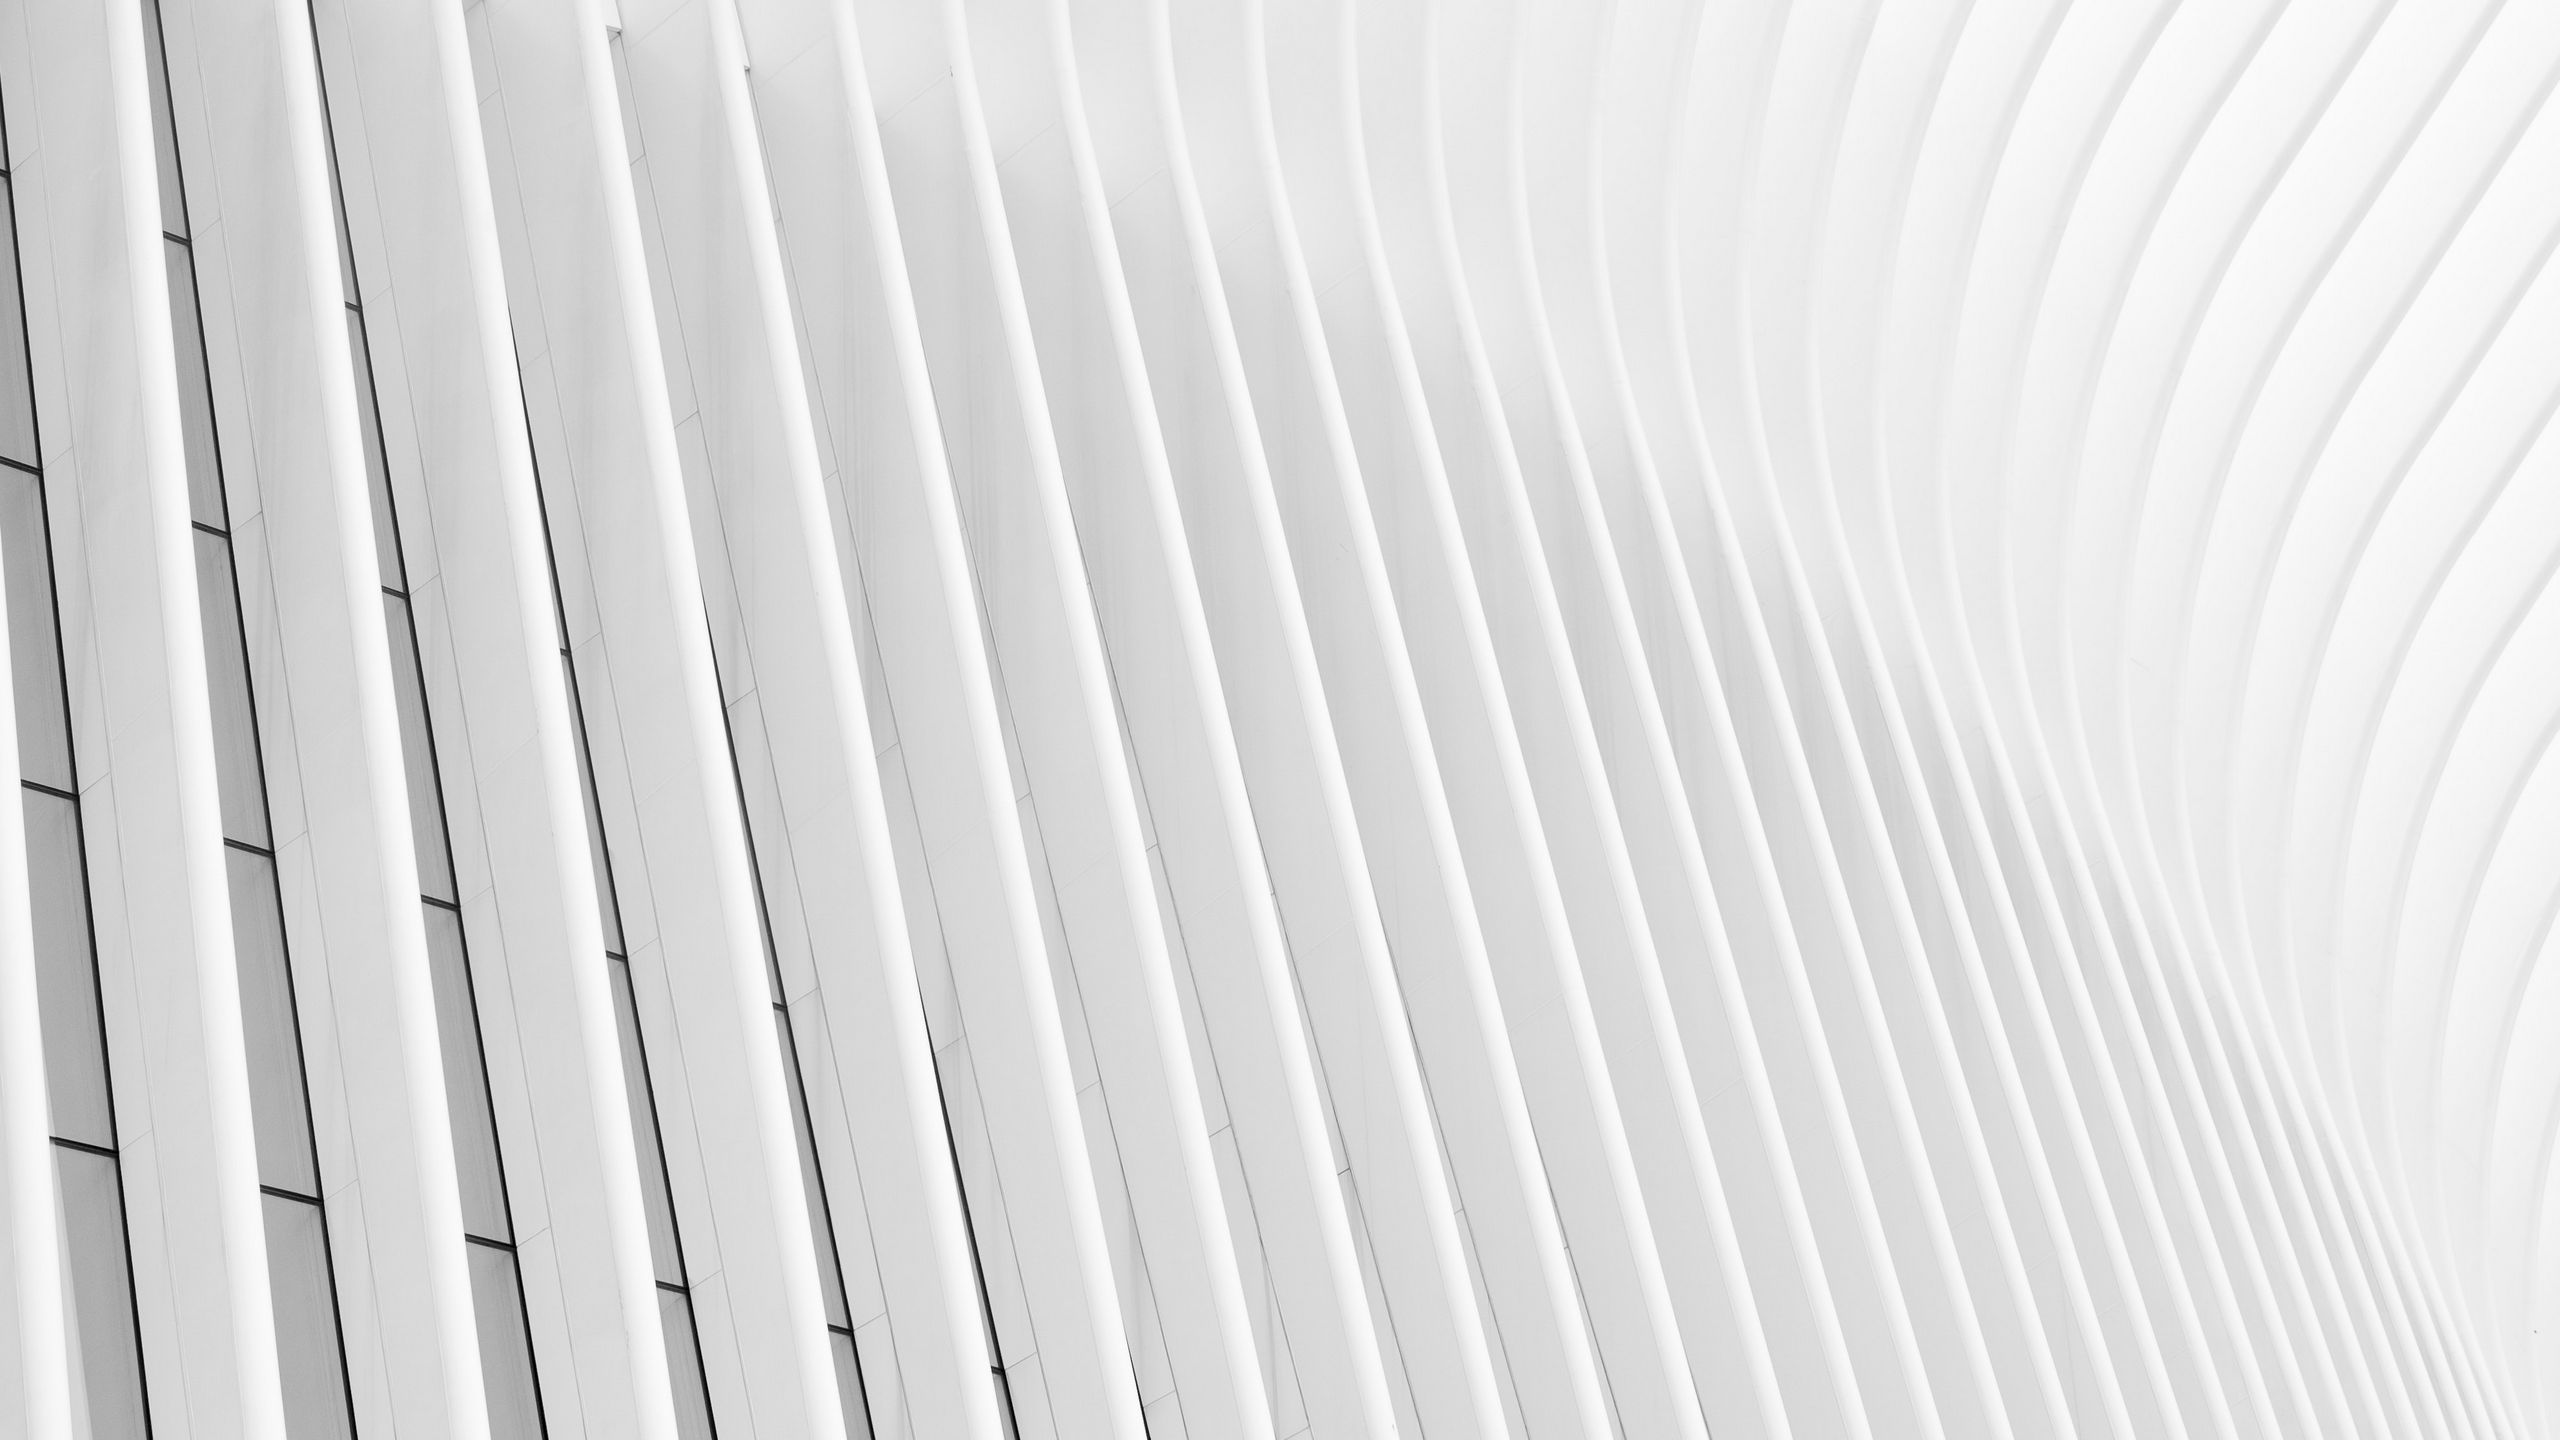 Download wallpaper 2560x1440 building, minimalism, white, architecture  widescreen 16:9 hd background